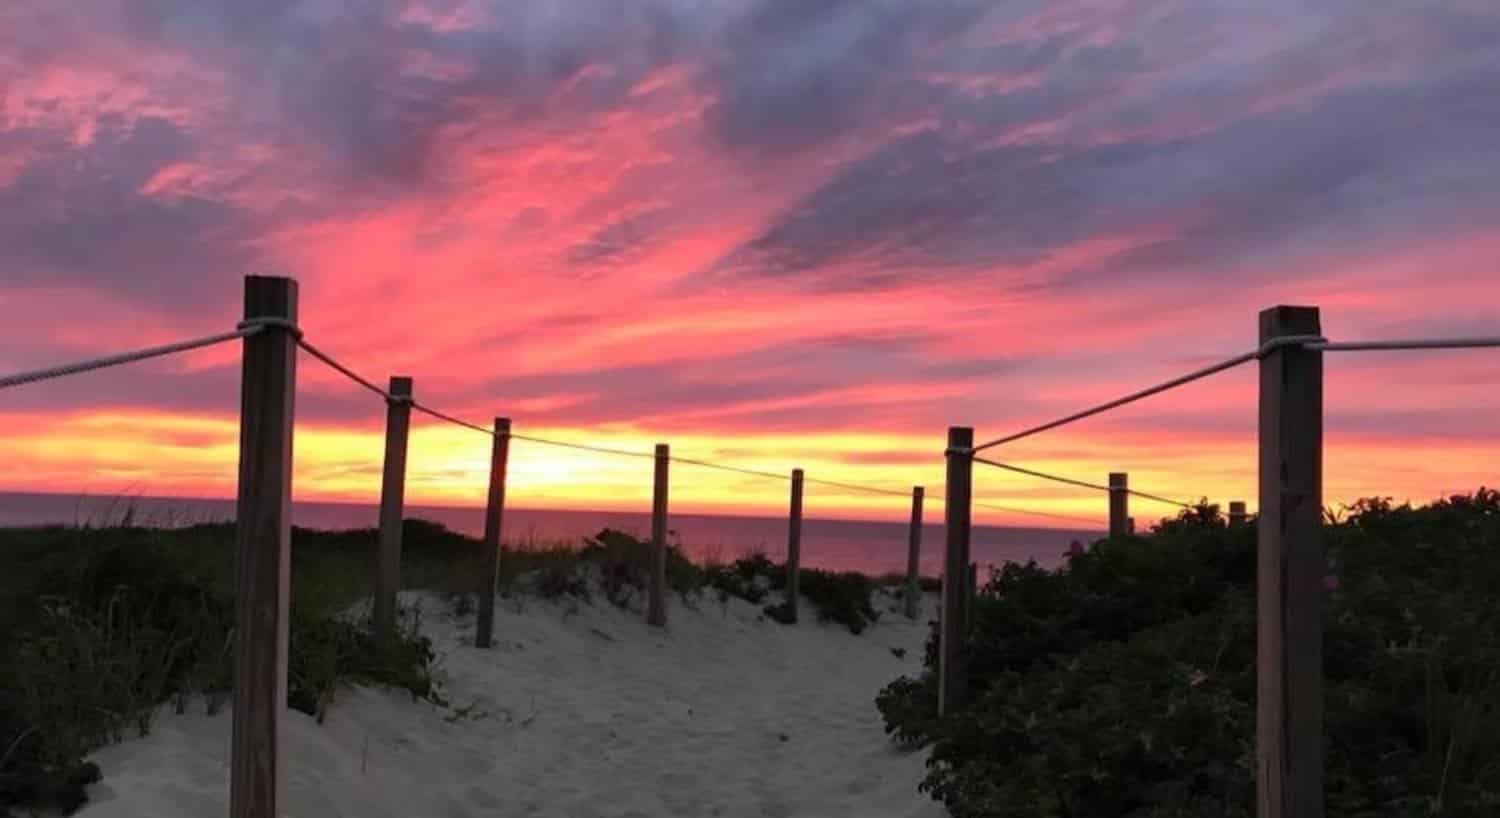 Sandy path with wooden posts and ropes leading to the beach with the sun rising in the background